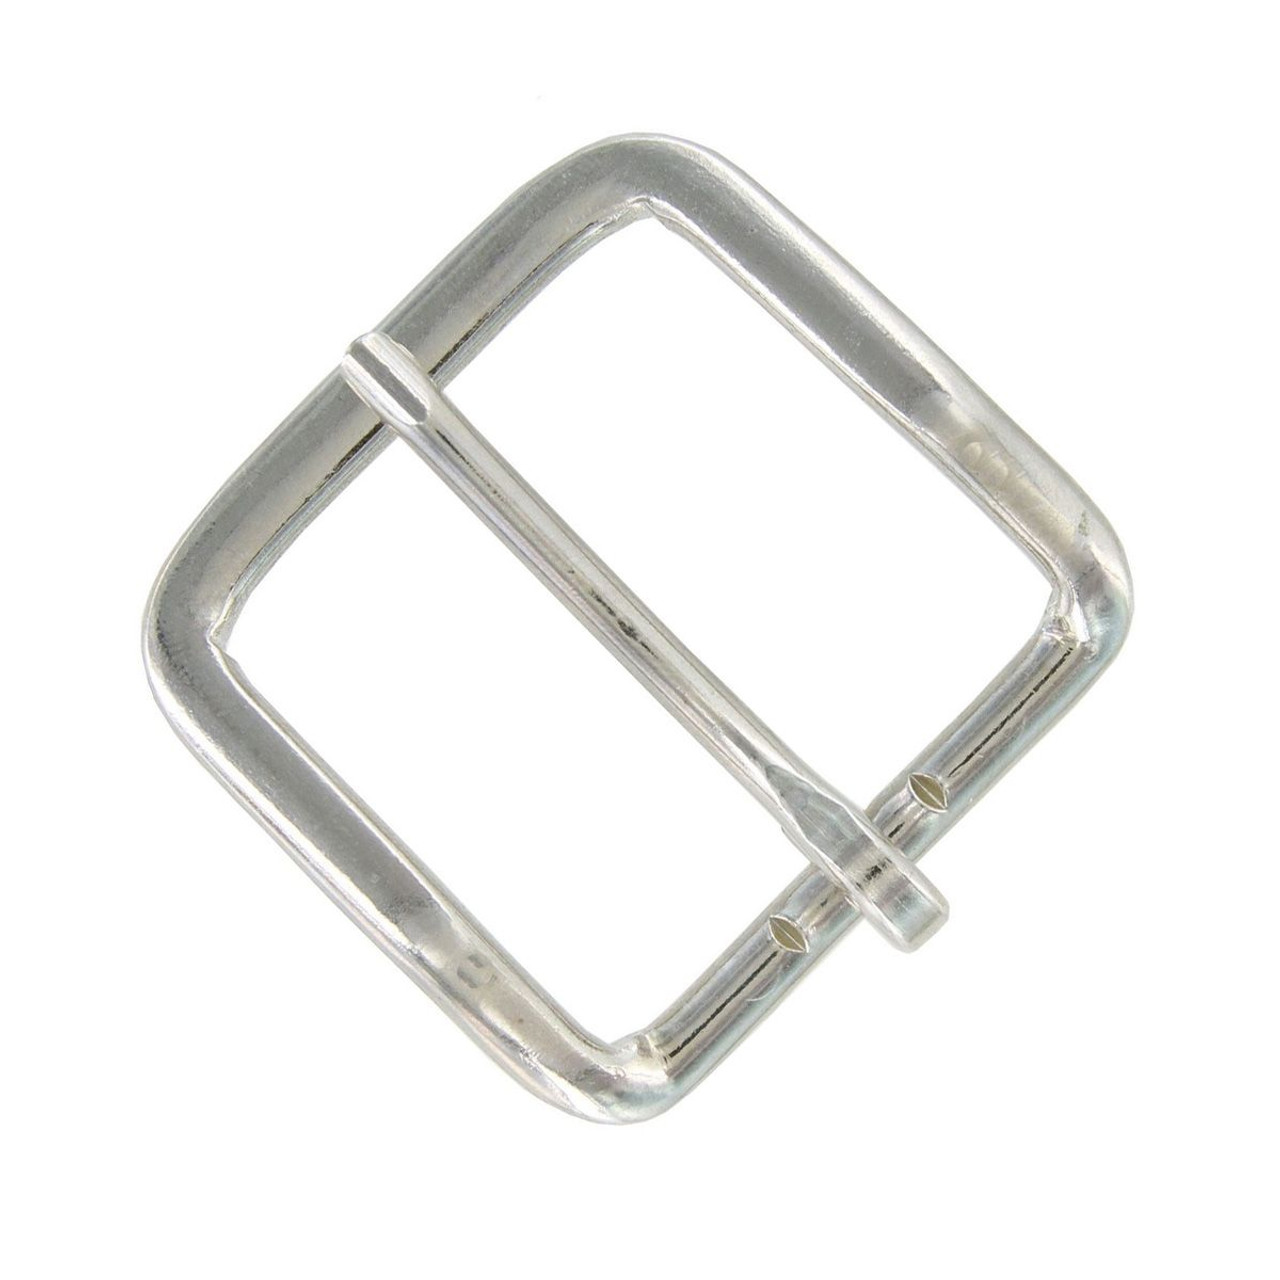 40MM Simple Single Prong Replacement Belt Buckle